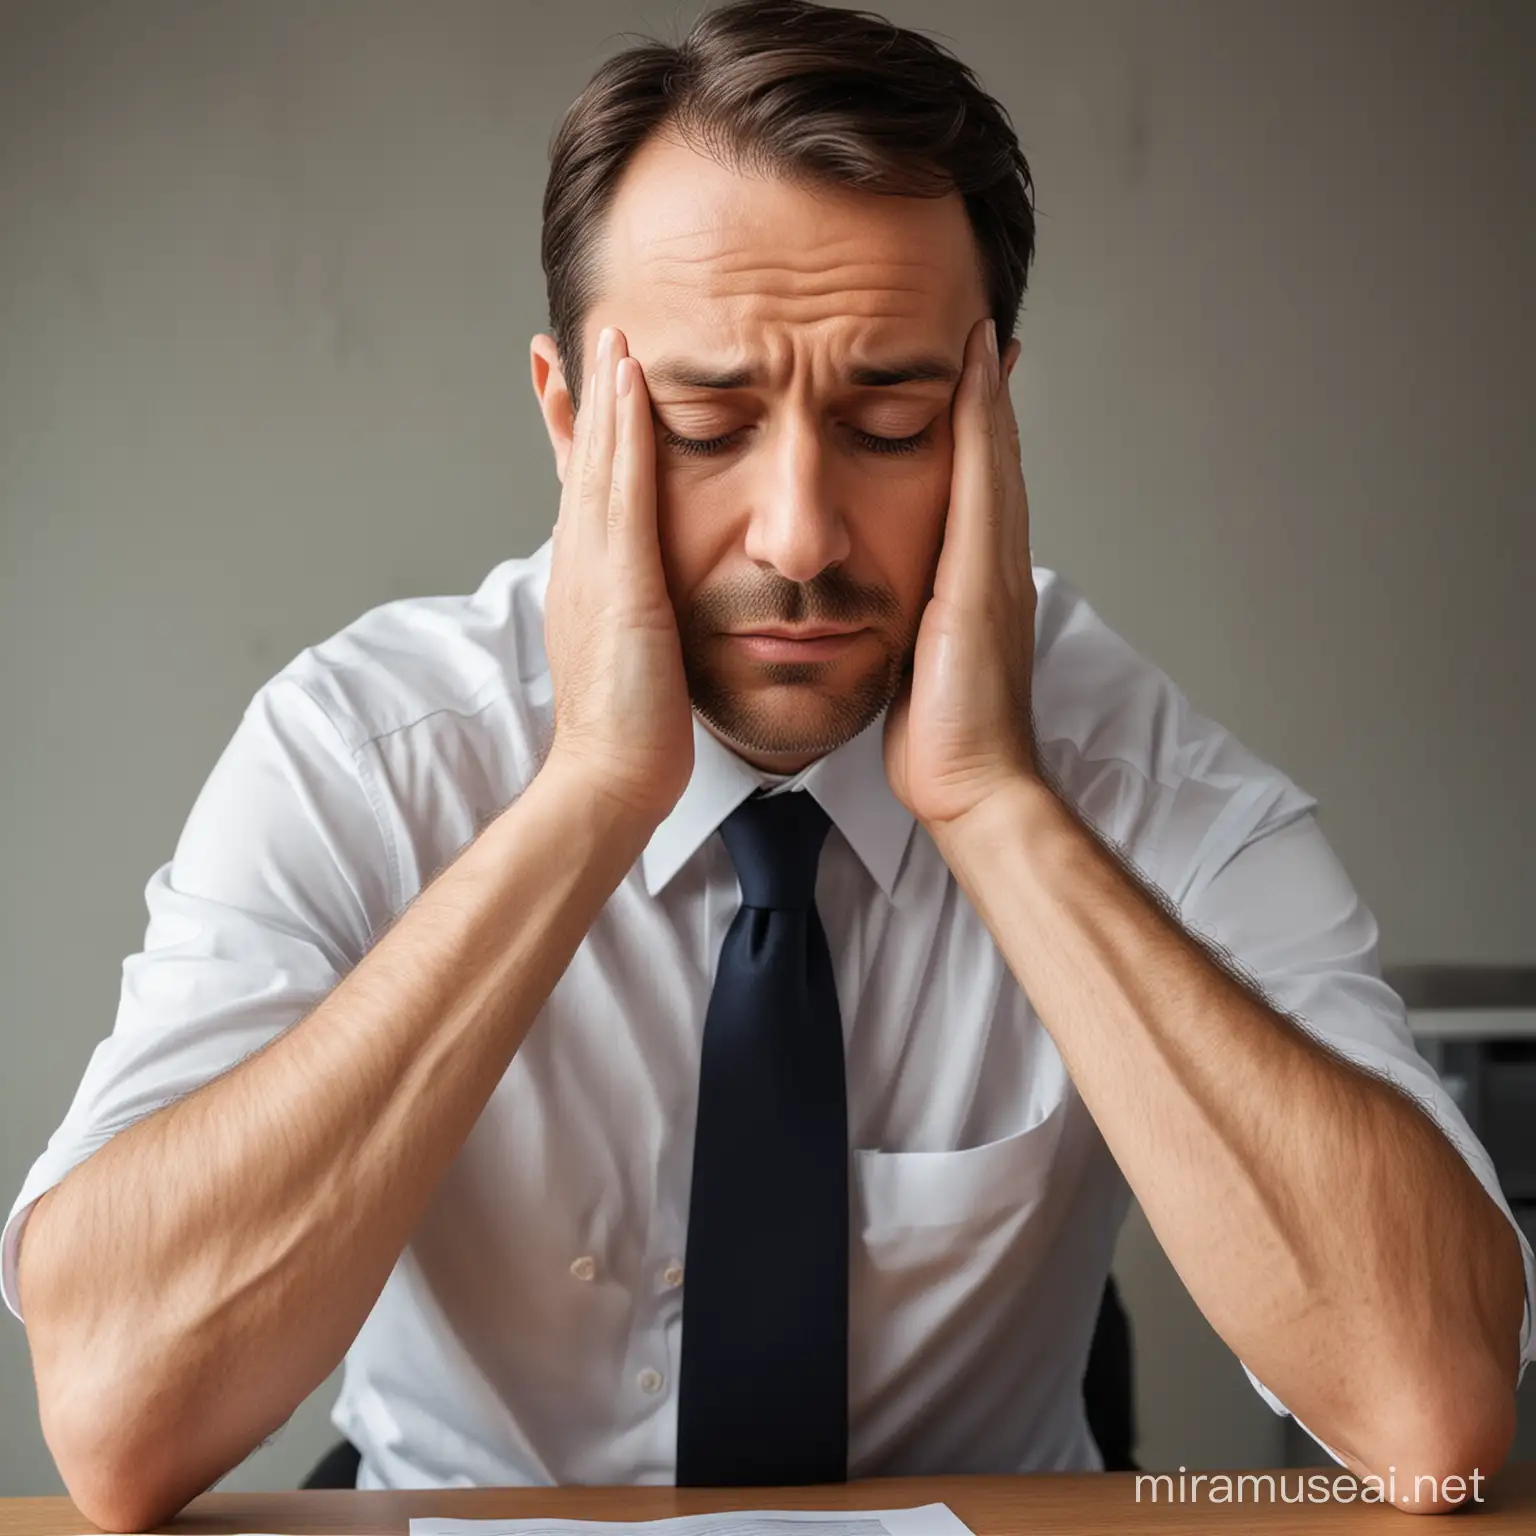 Create a realistic image of a man around 40 years old, looking worried and stressed. He should be in a simple office setting, rubbing his forehead in a gesture of concern and stress. The photo should be taken from a distance and from the side, ensuring that the man's face is not identifiable, focusing on the body language and the environment to convey the emotional state. Emphasize the atmosphere of the office, suggesting a context that contributes to his worry and stress